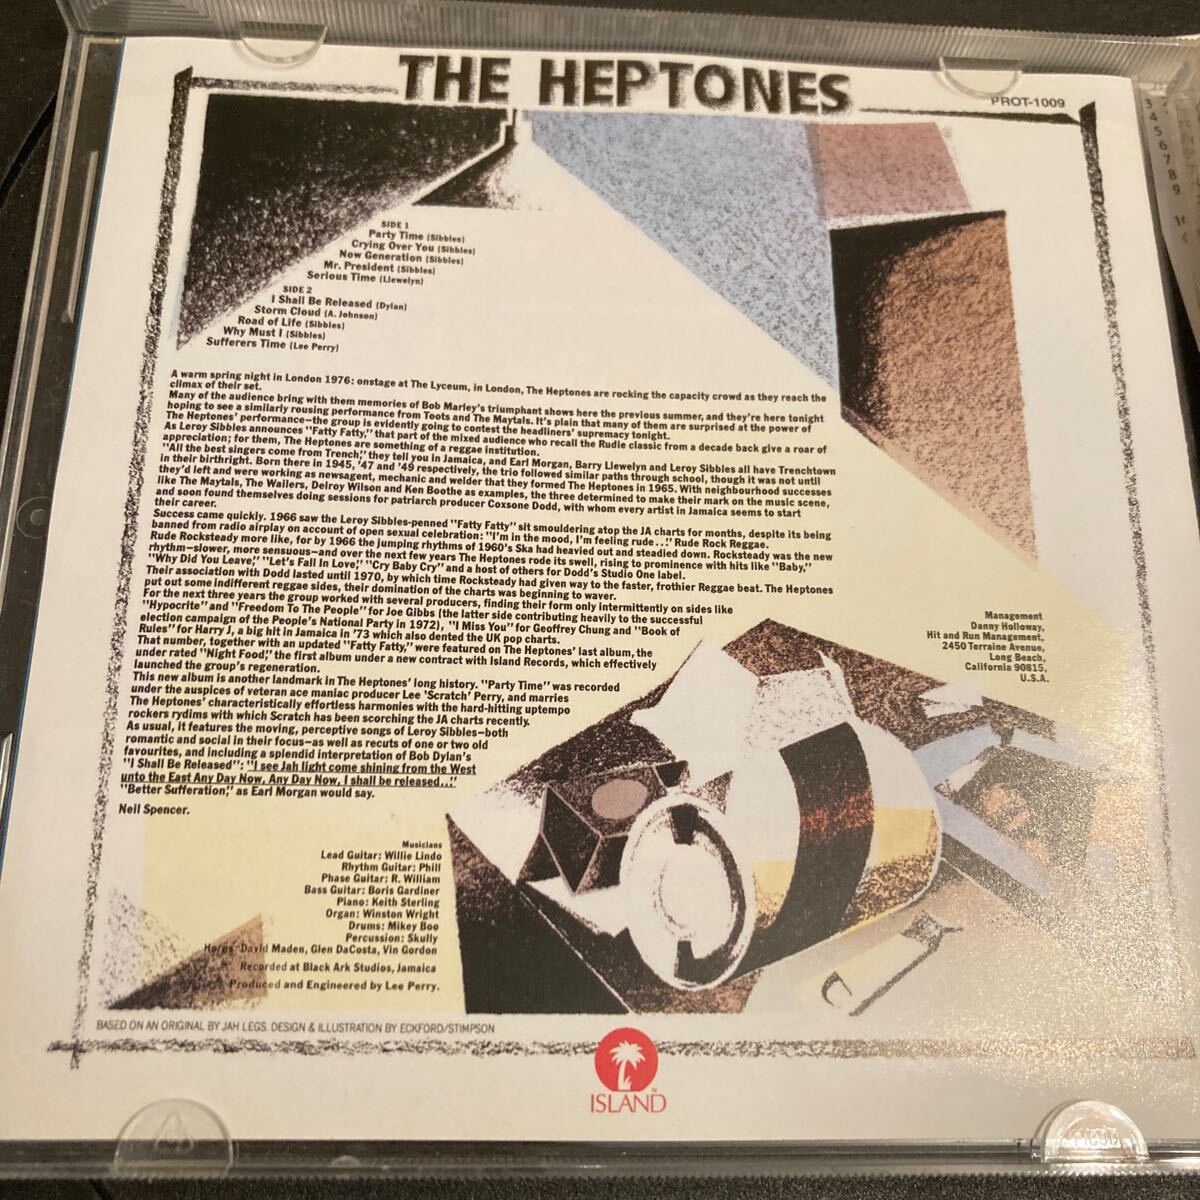 THE HEPTONES / NIGHT FOOD + PARTY TIME 洋楽 REGGAE 国内盤 CD リイシュー 帯付き ルーツレゲエ LEE PERRY_画像3